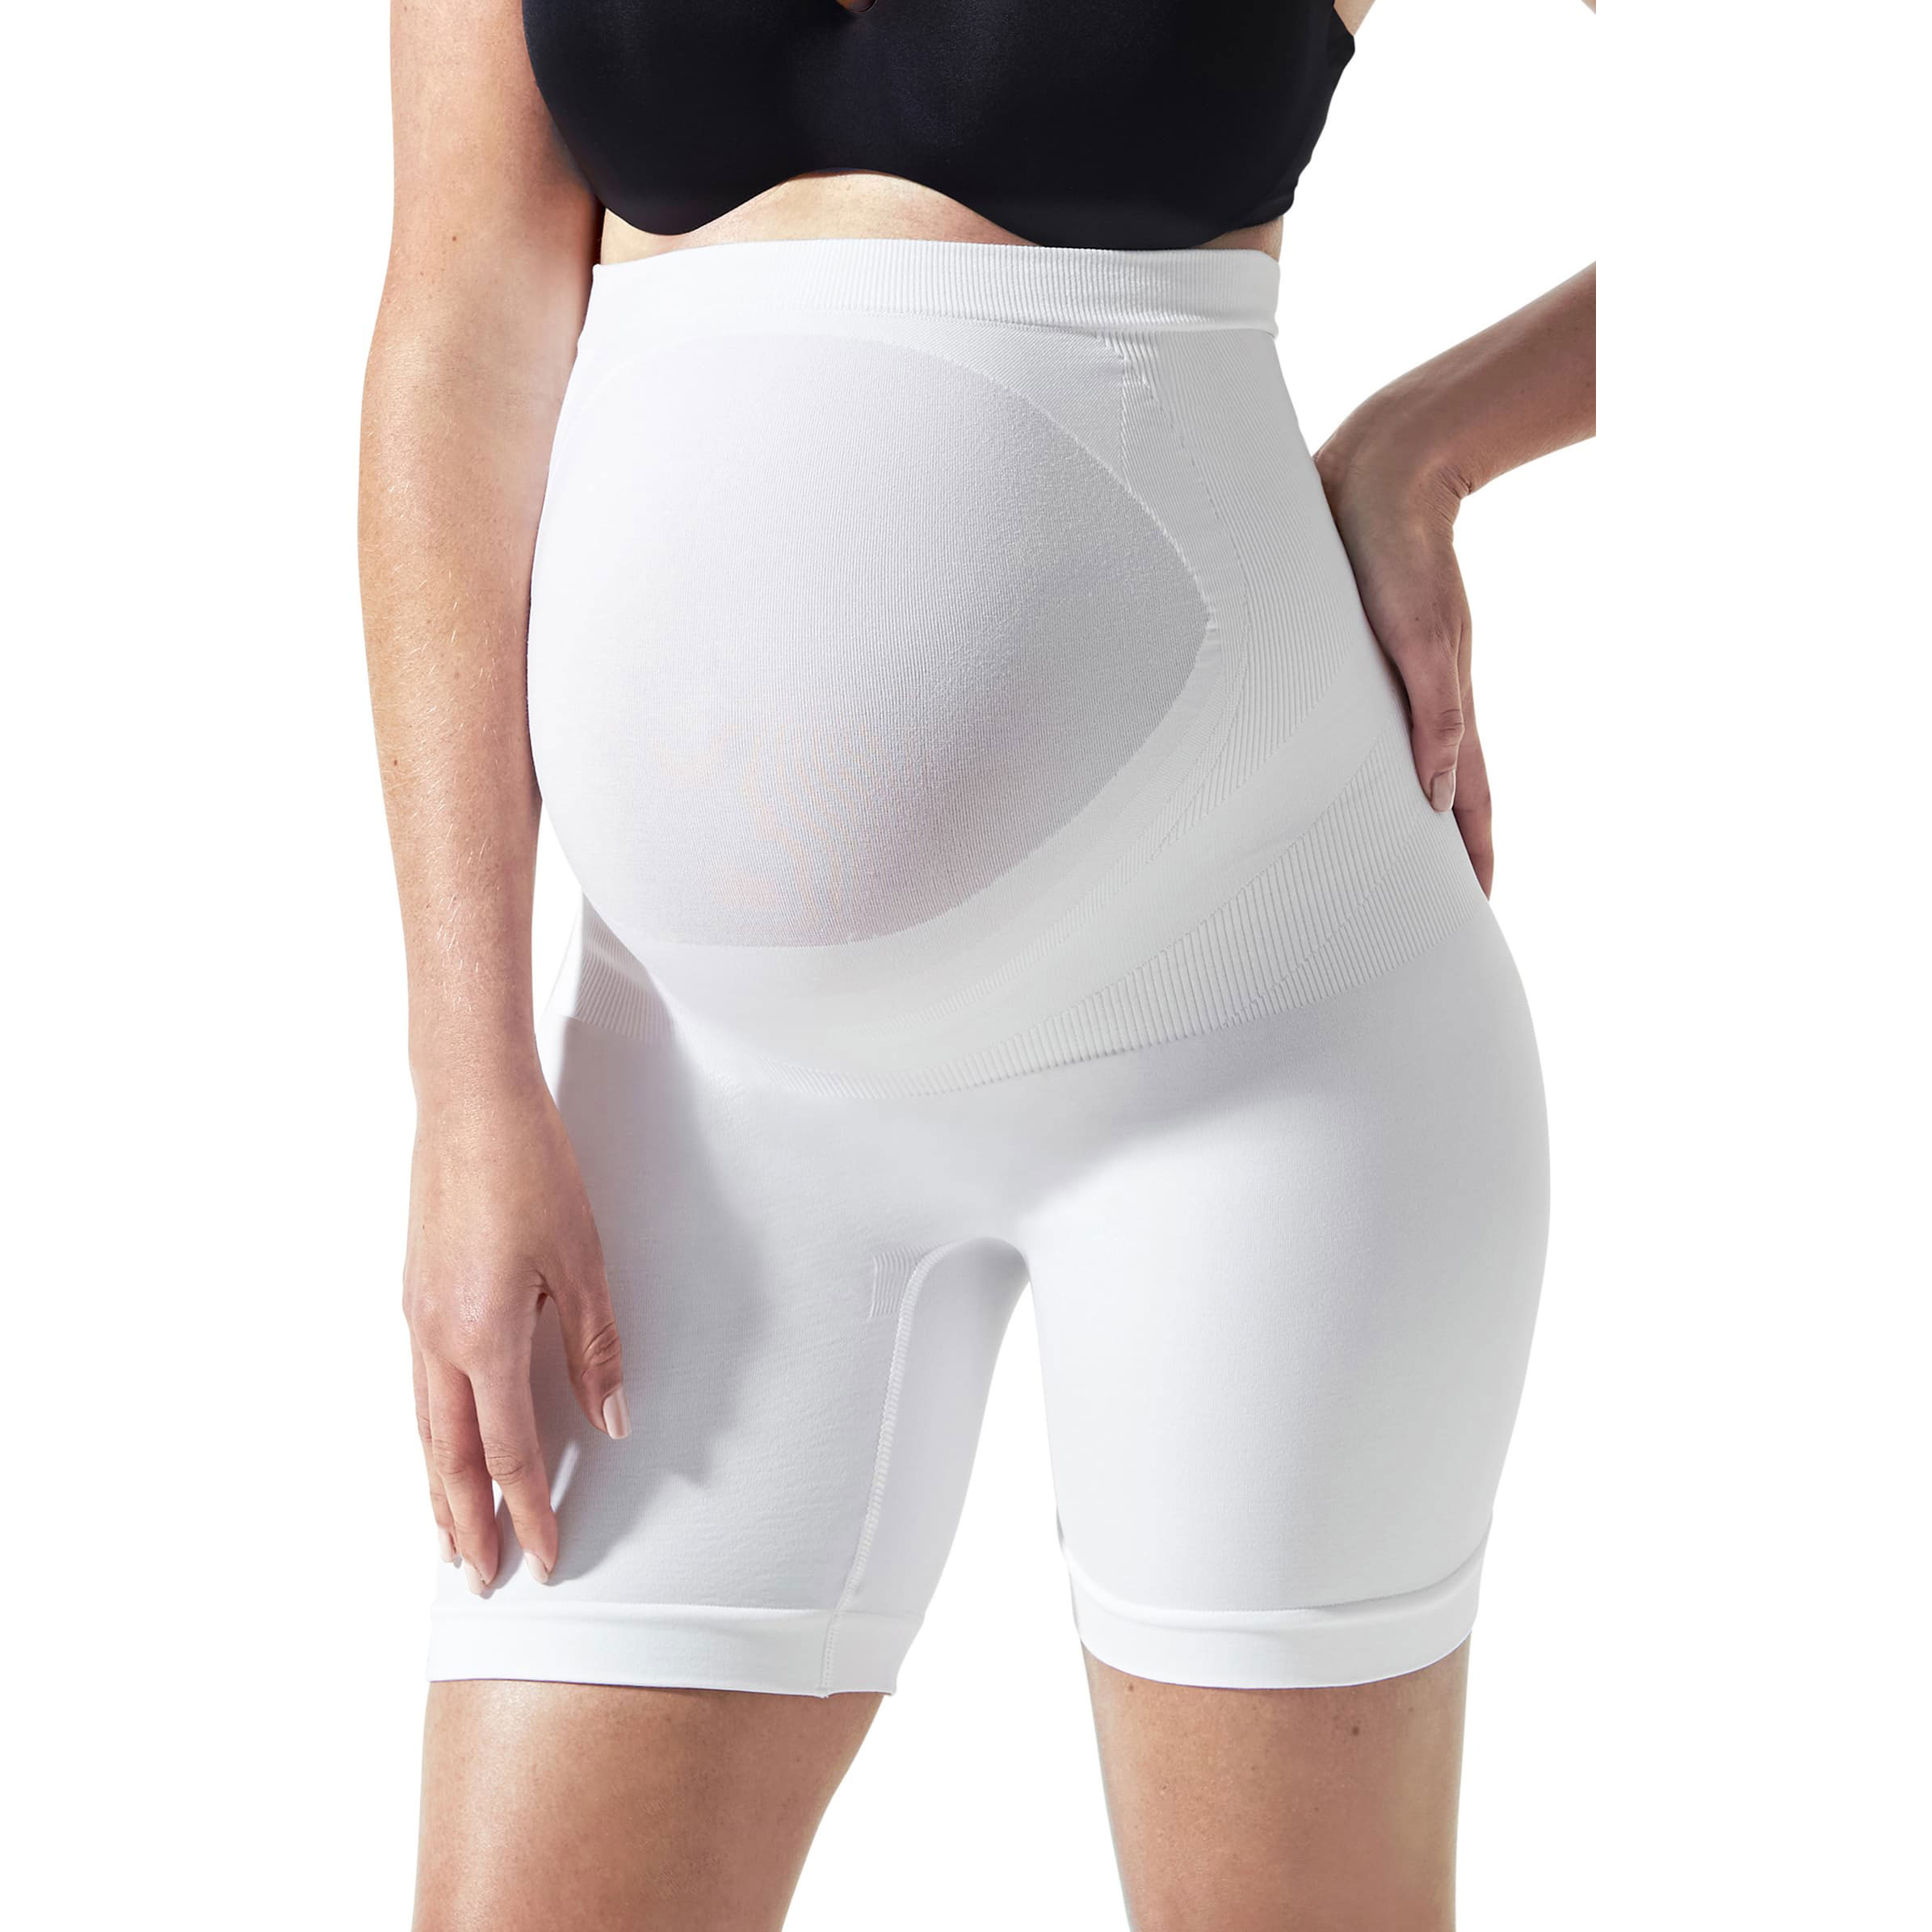 Blanqui Everyday Belly Support Maternity Shorts